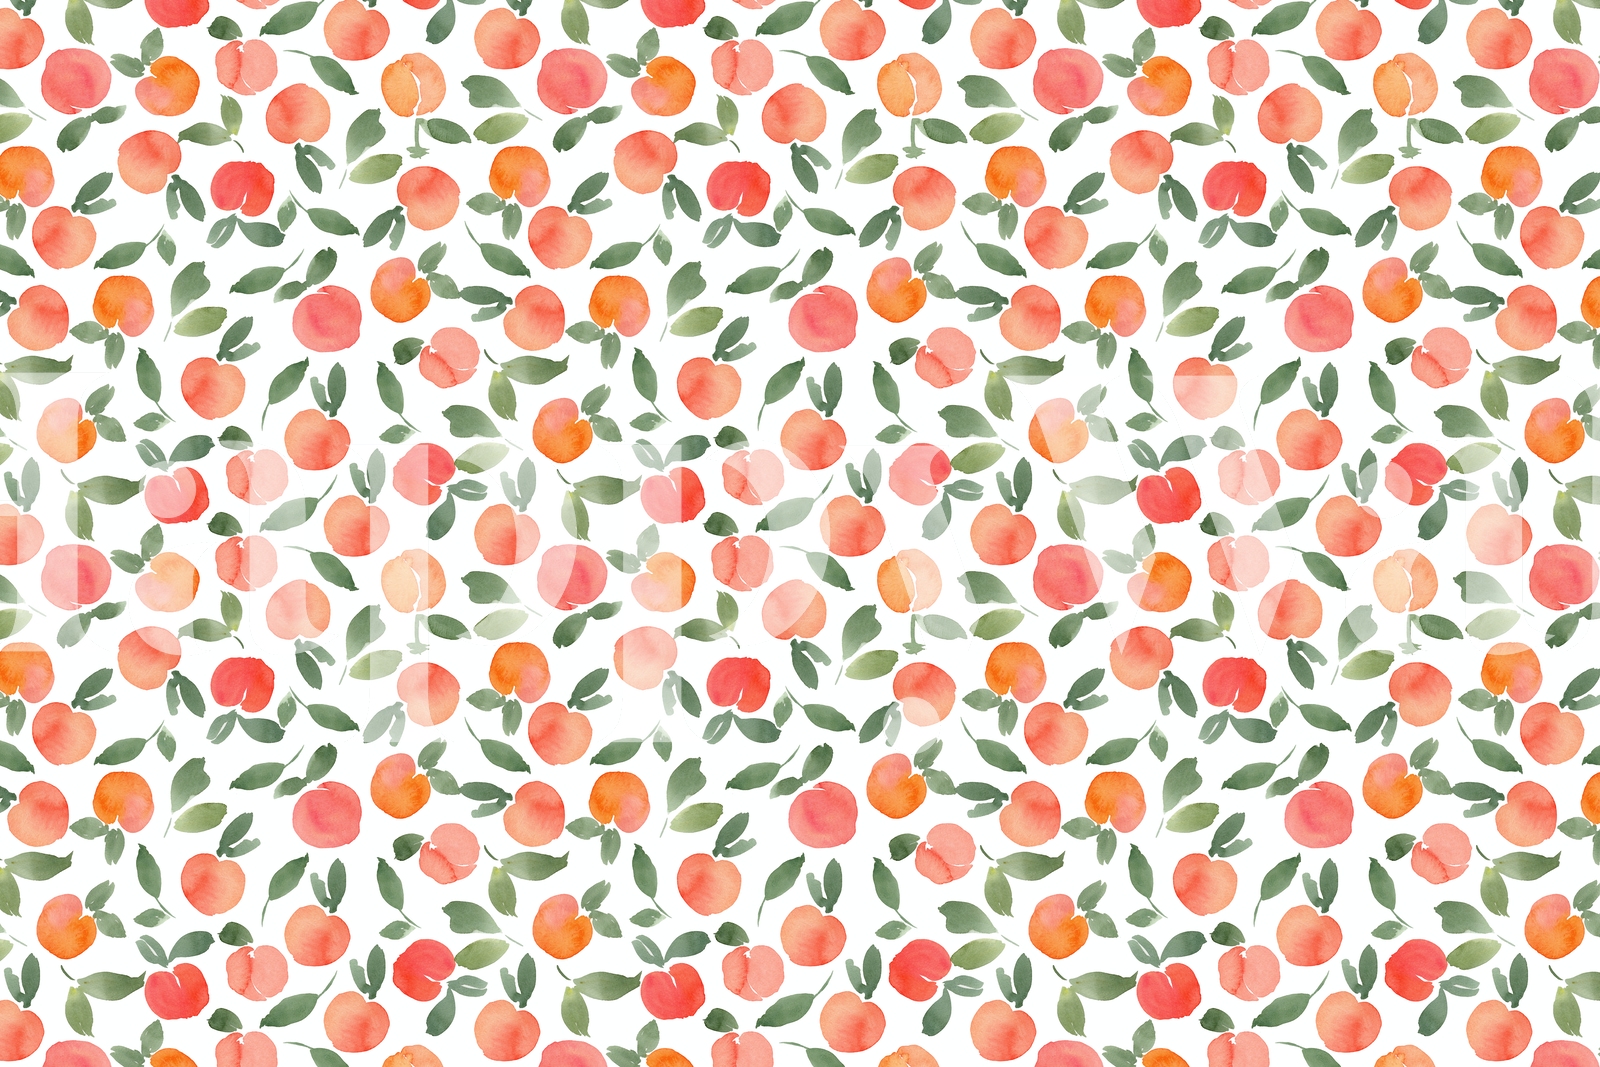 Cartoon Cute Peach Wallpaper Background Peach Wallpaper Peach  Illustration Watercolor Peaches Background Image for Free Download